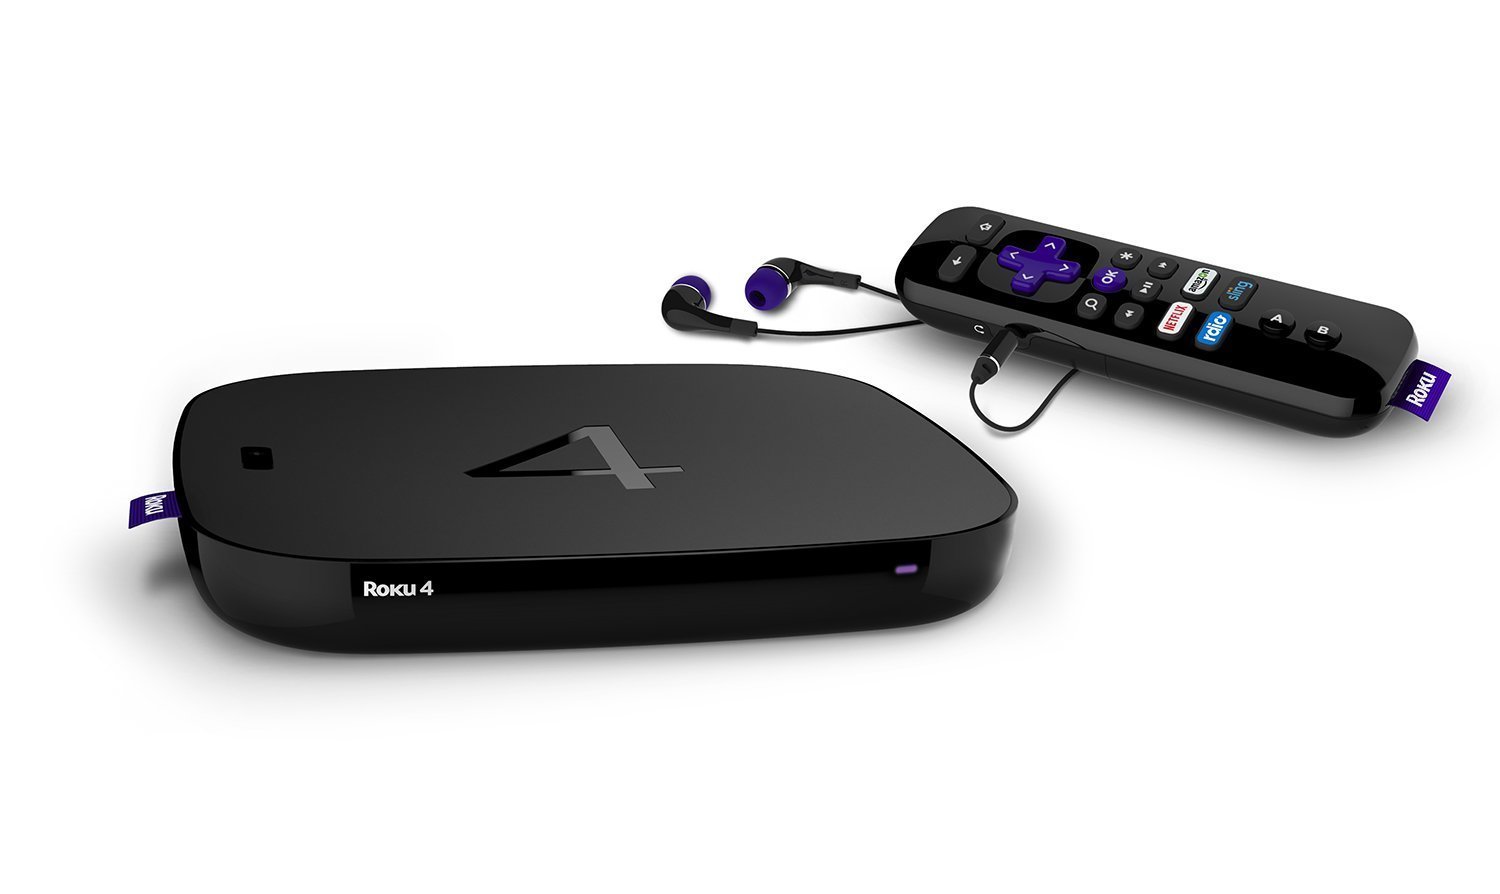 Today only: Refurbished Roku 4k/UHD streaming media player for $54